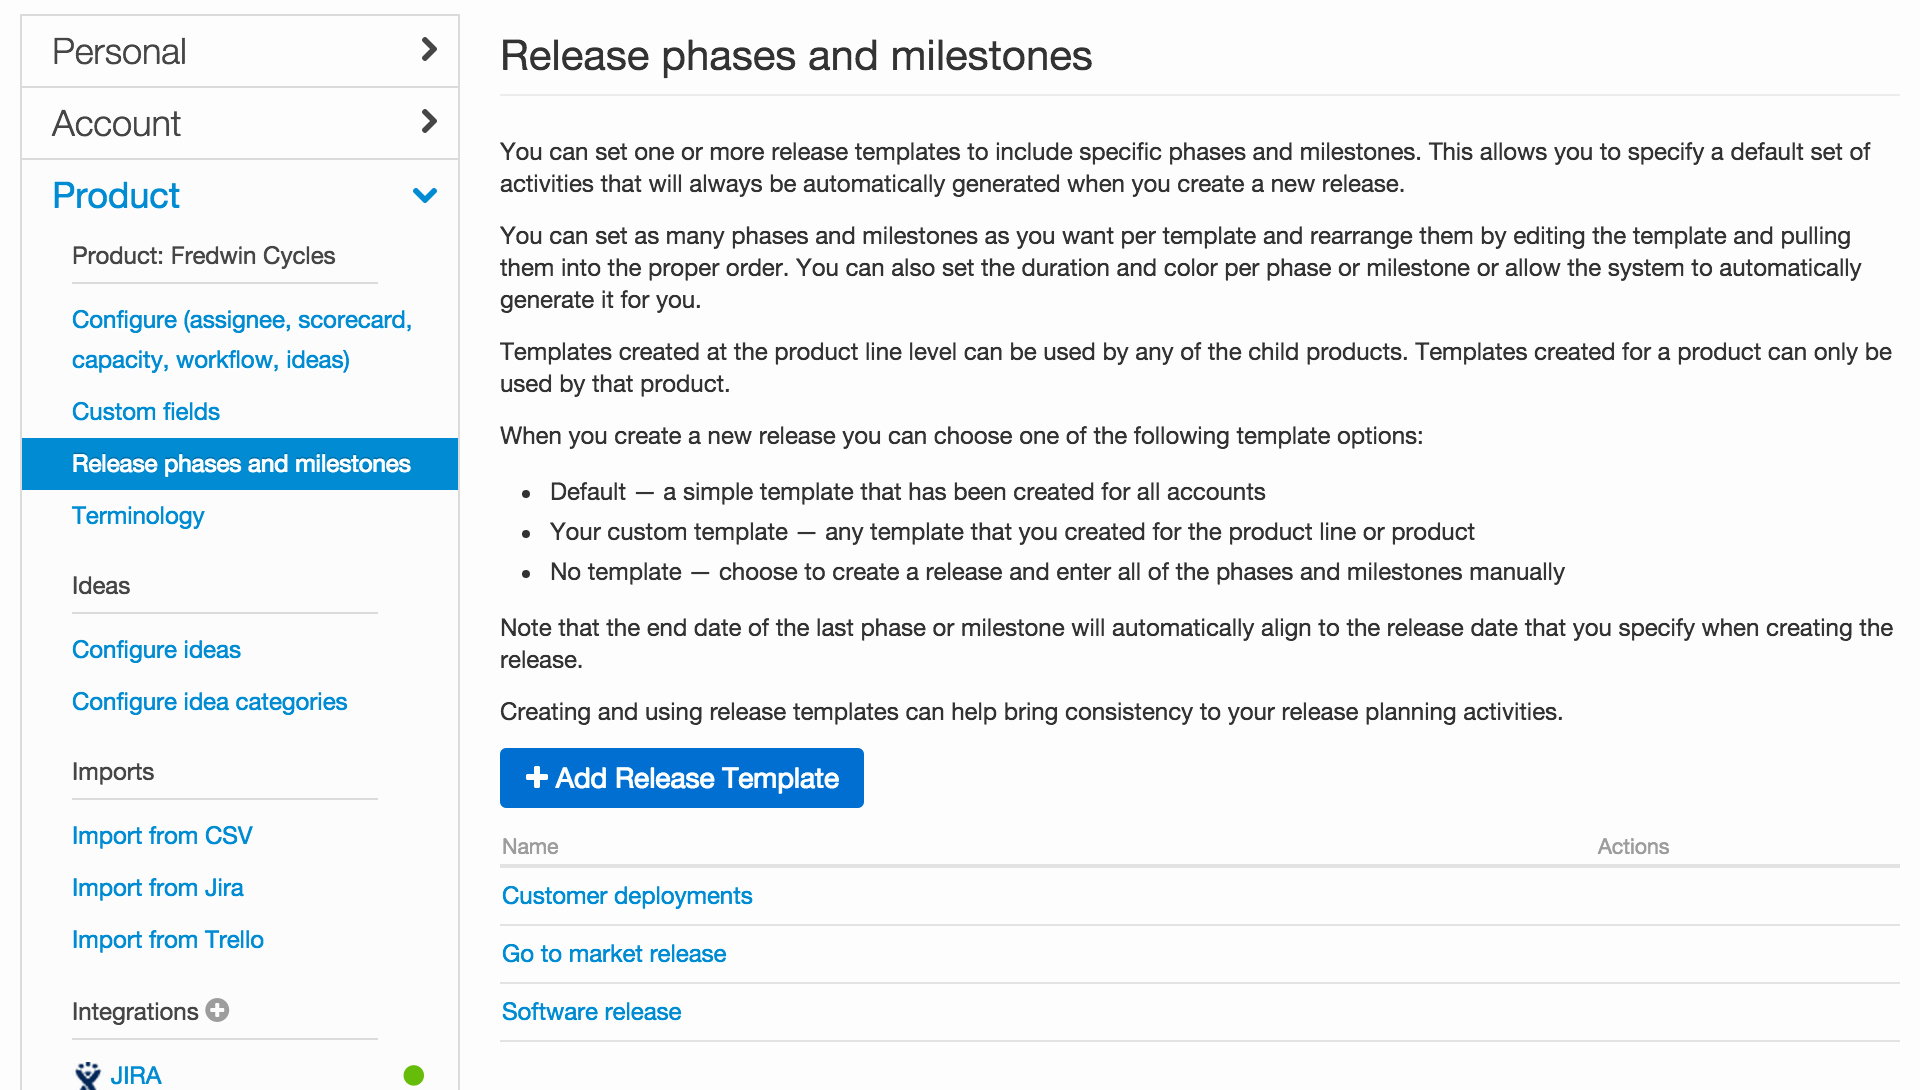 Software Release Plan Template Fresh Manage Your Releases with Phases and Milestones Including